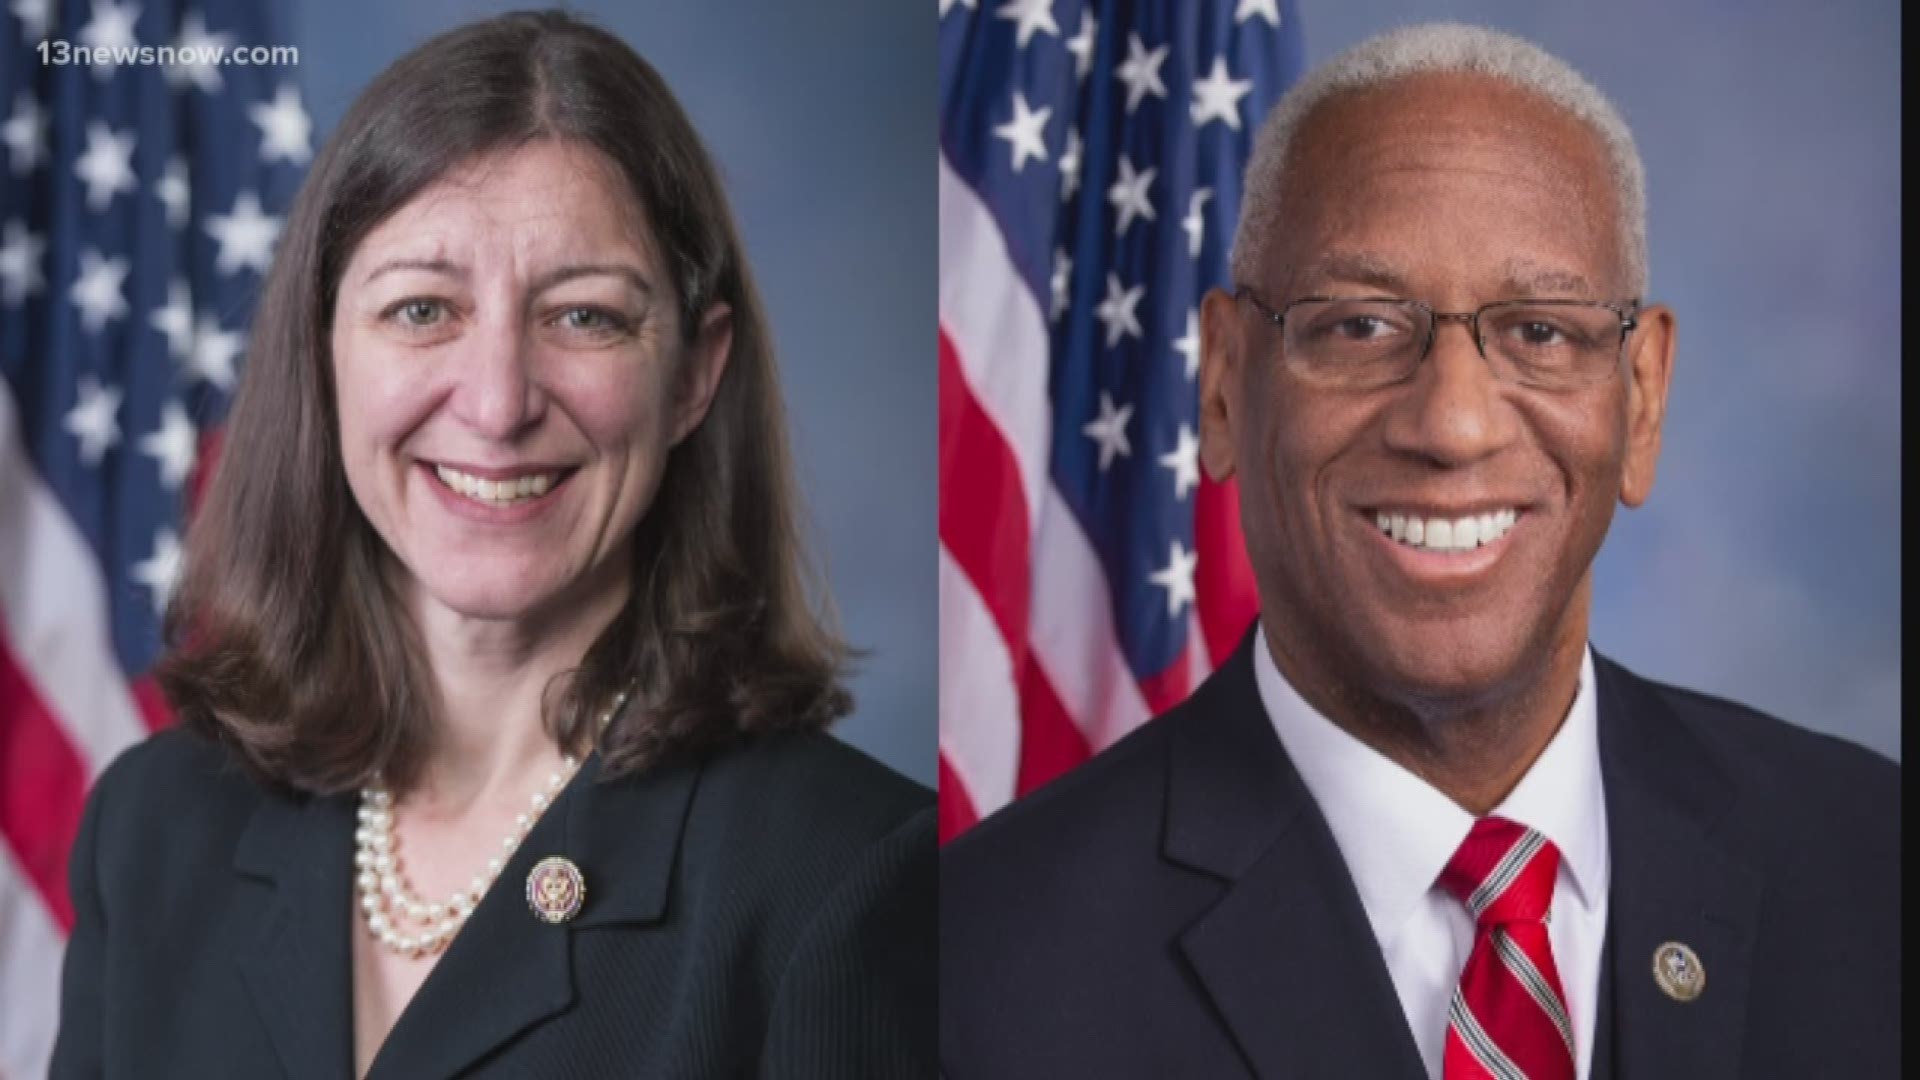 Representatives Elaine Luria and Don McEachin have called for the impeachment of President Donald Trump among others. Nancy Pelosi announced an inquiry into Trump.